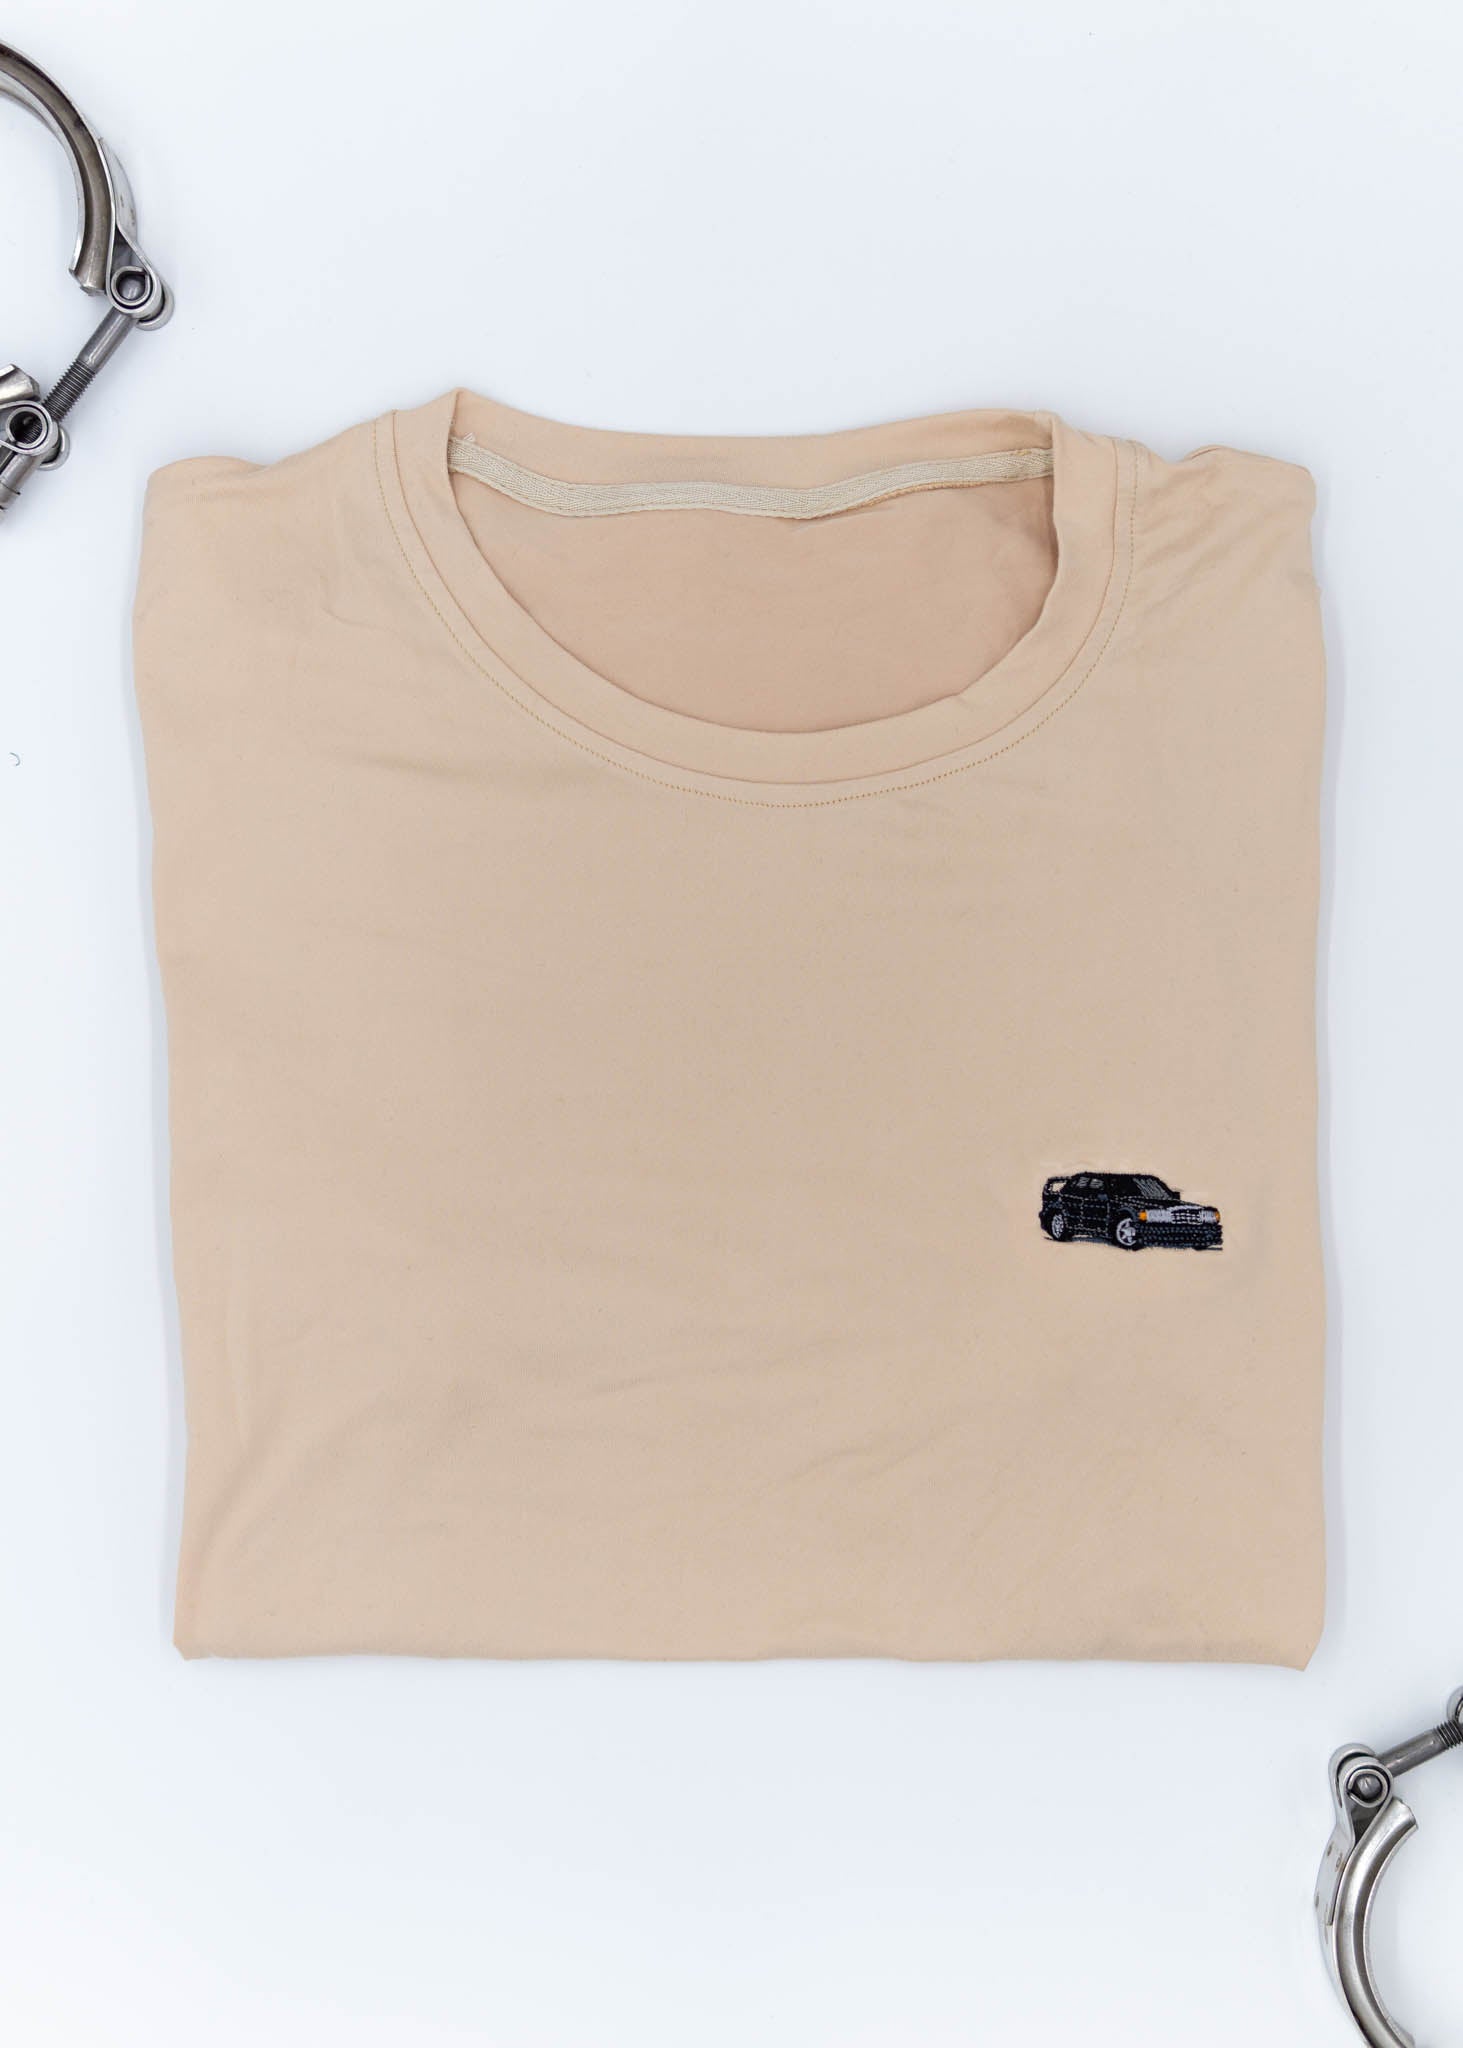 A khaki Mercedes-Benz t-shirt for men. Photo is a close up view of the shirt with an embroidered black W201 190E 2.5-16 Evo II. Fabric composition is a polyester, and cotton mix. The material is very soft, stretchy, non-transparent. The style of this shirt is short sleeve, with a crewneck neckline.